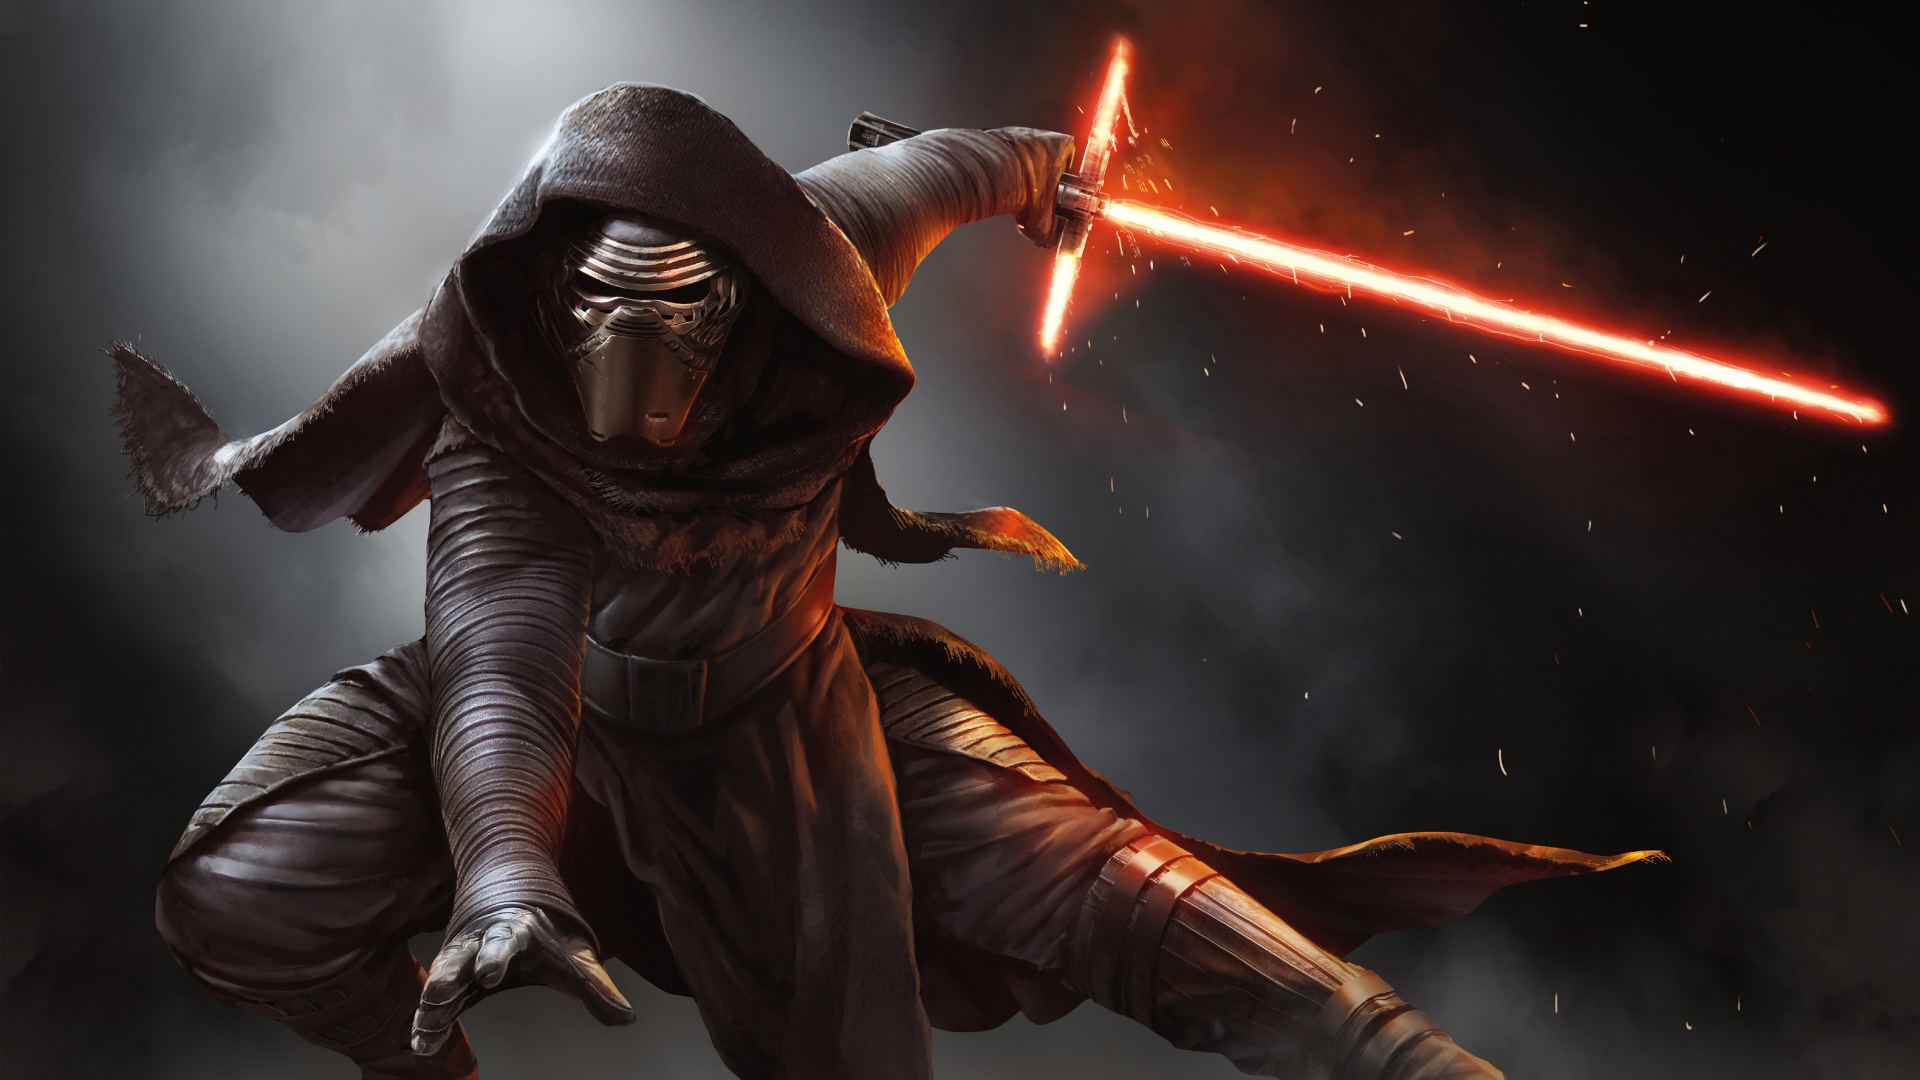 We finally know why Kylo Rens lightsaber has a crossguard in Star